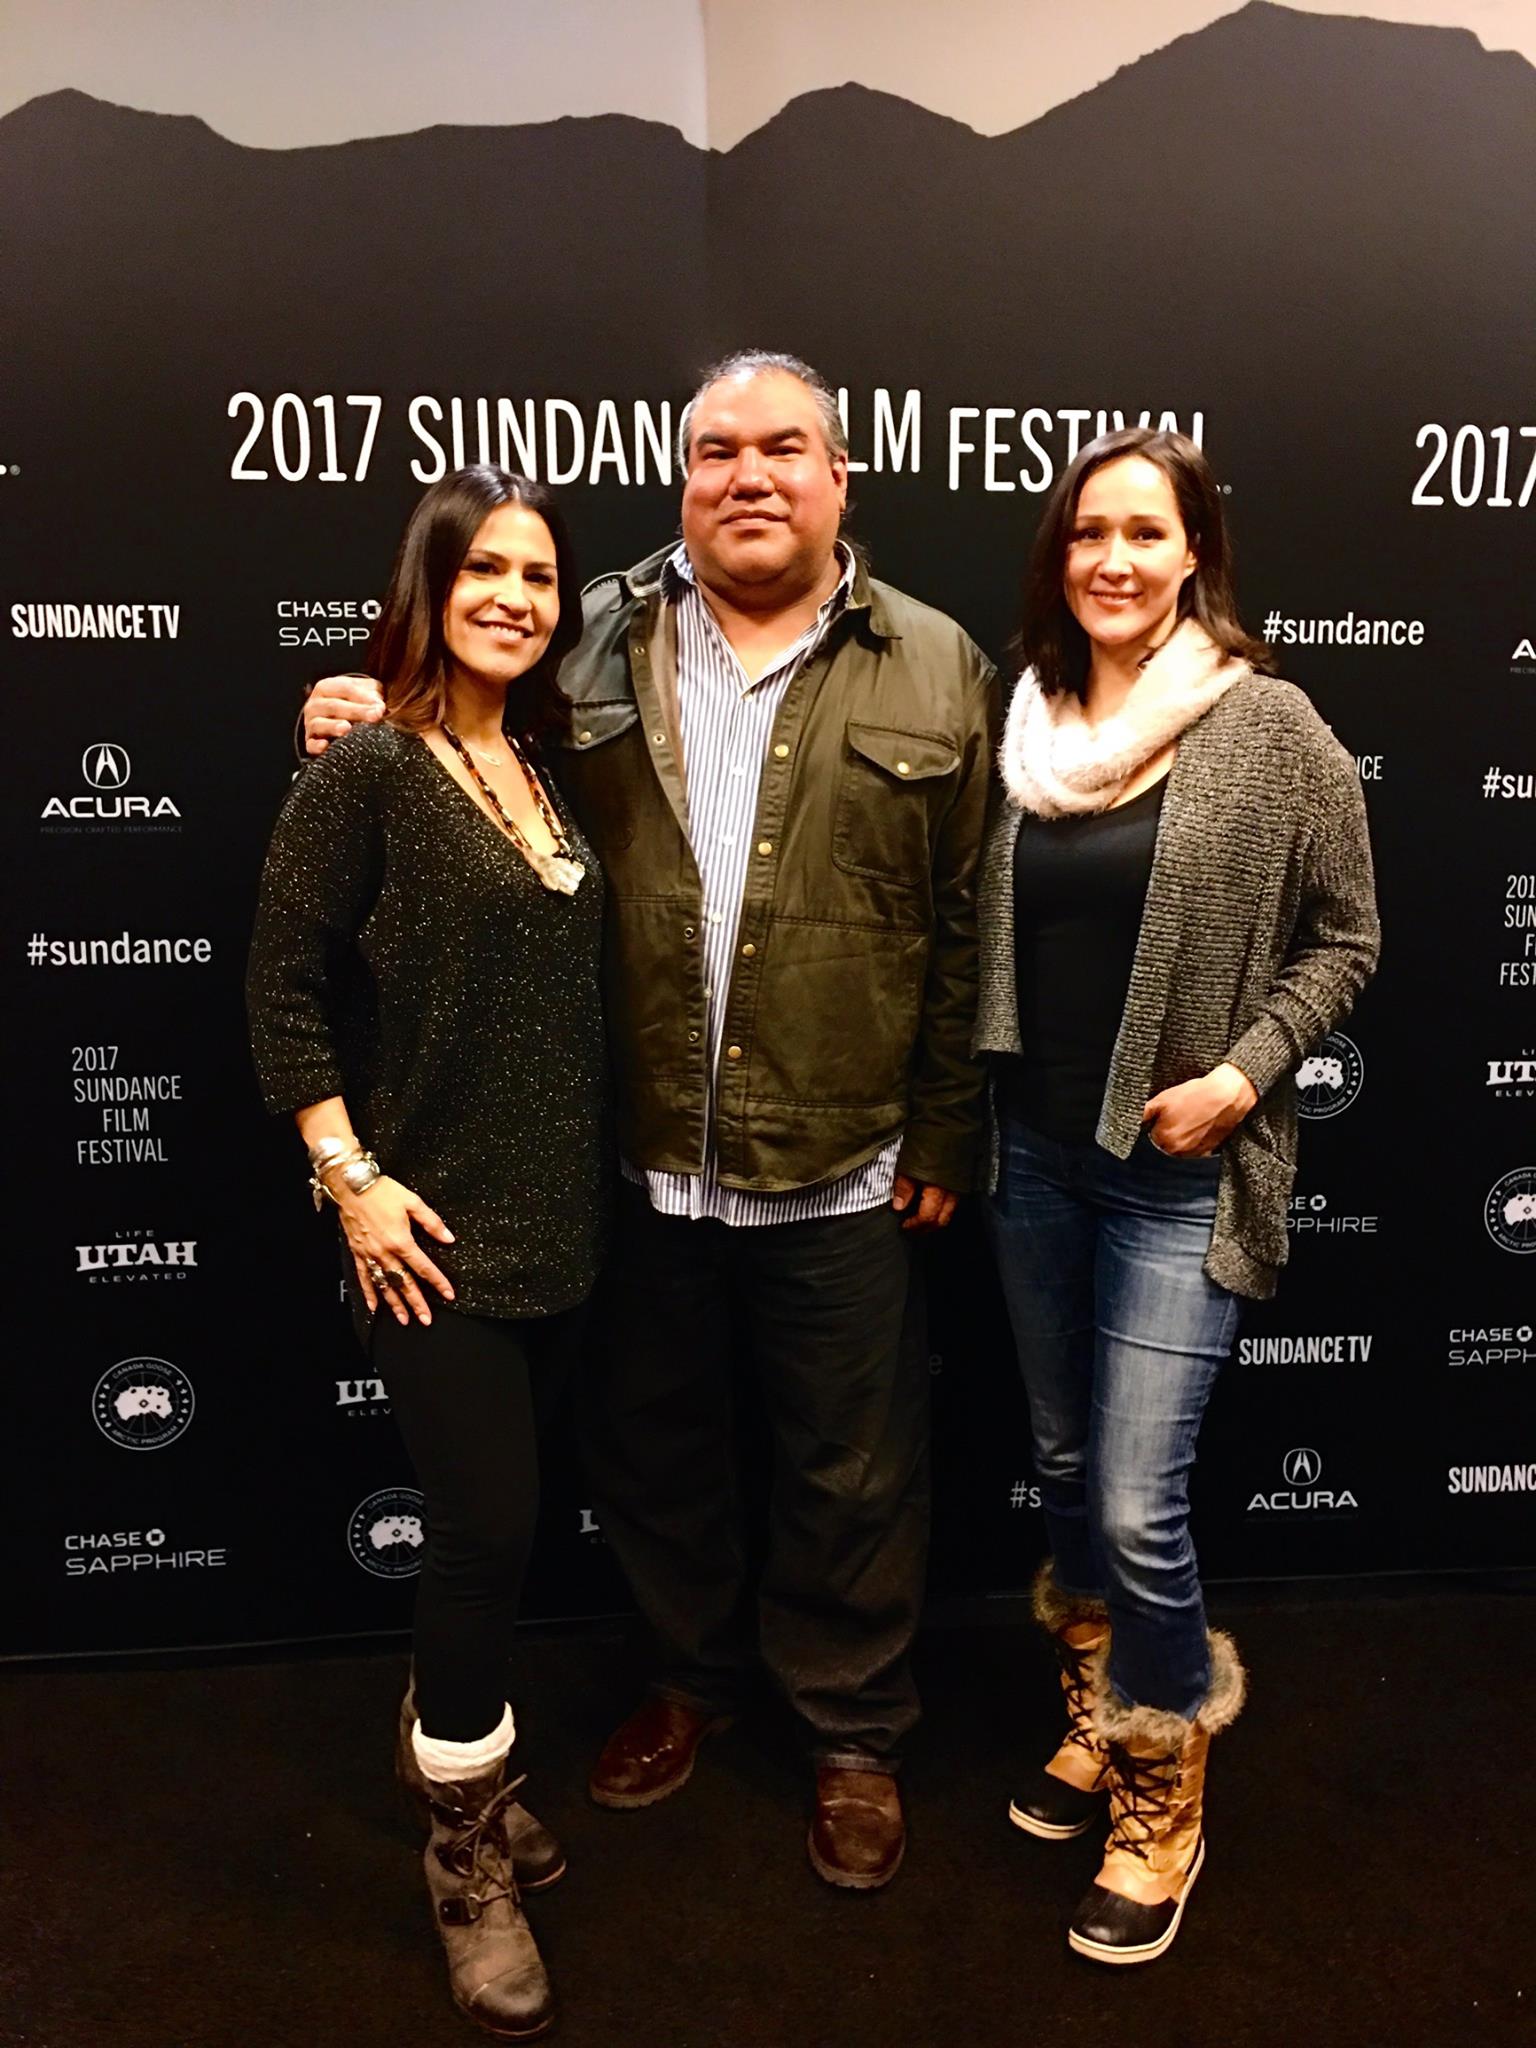 Dr. Joely Proudfit, Chris Eyre, and another woman at the Sundance Film Festival, standing in front of a black photo background wall with logos and the words "2017 Sundance Film Festival" in white